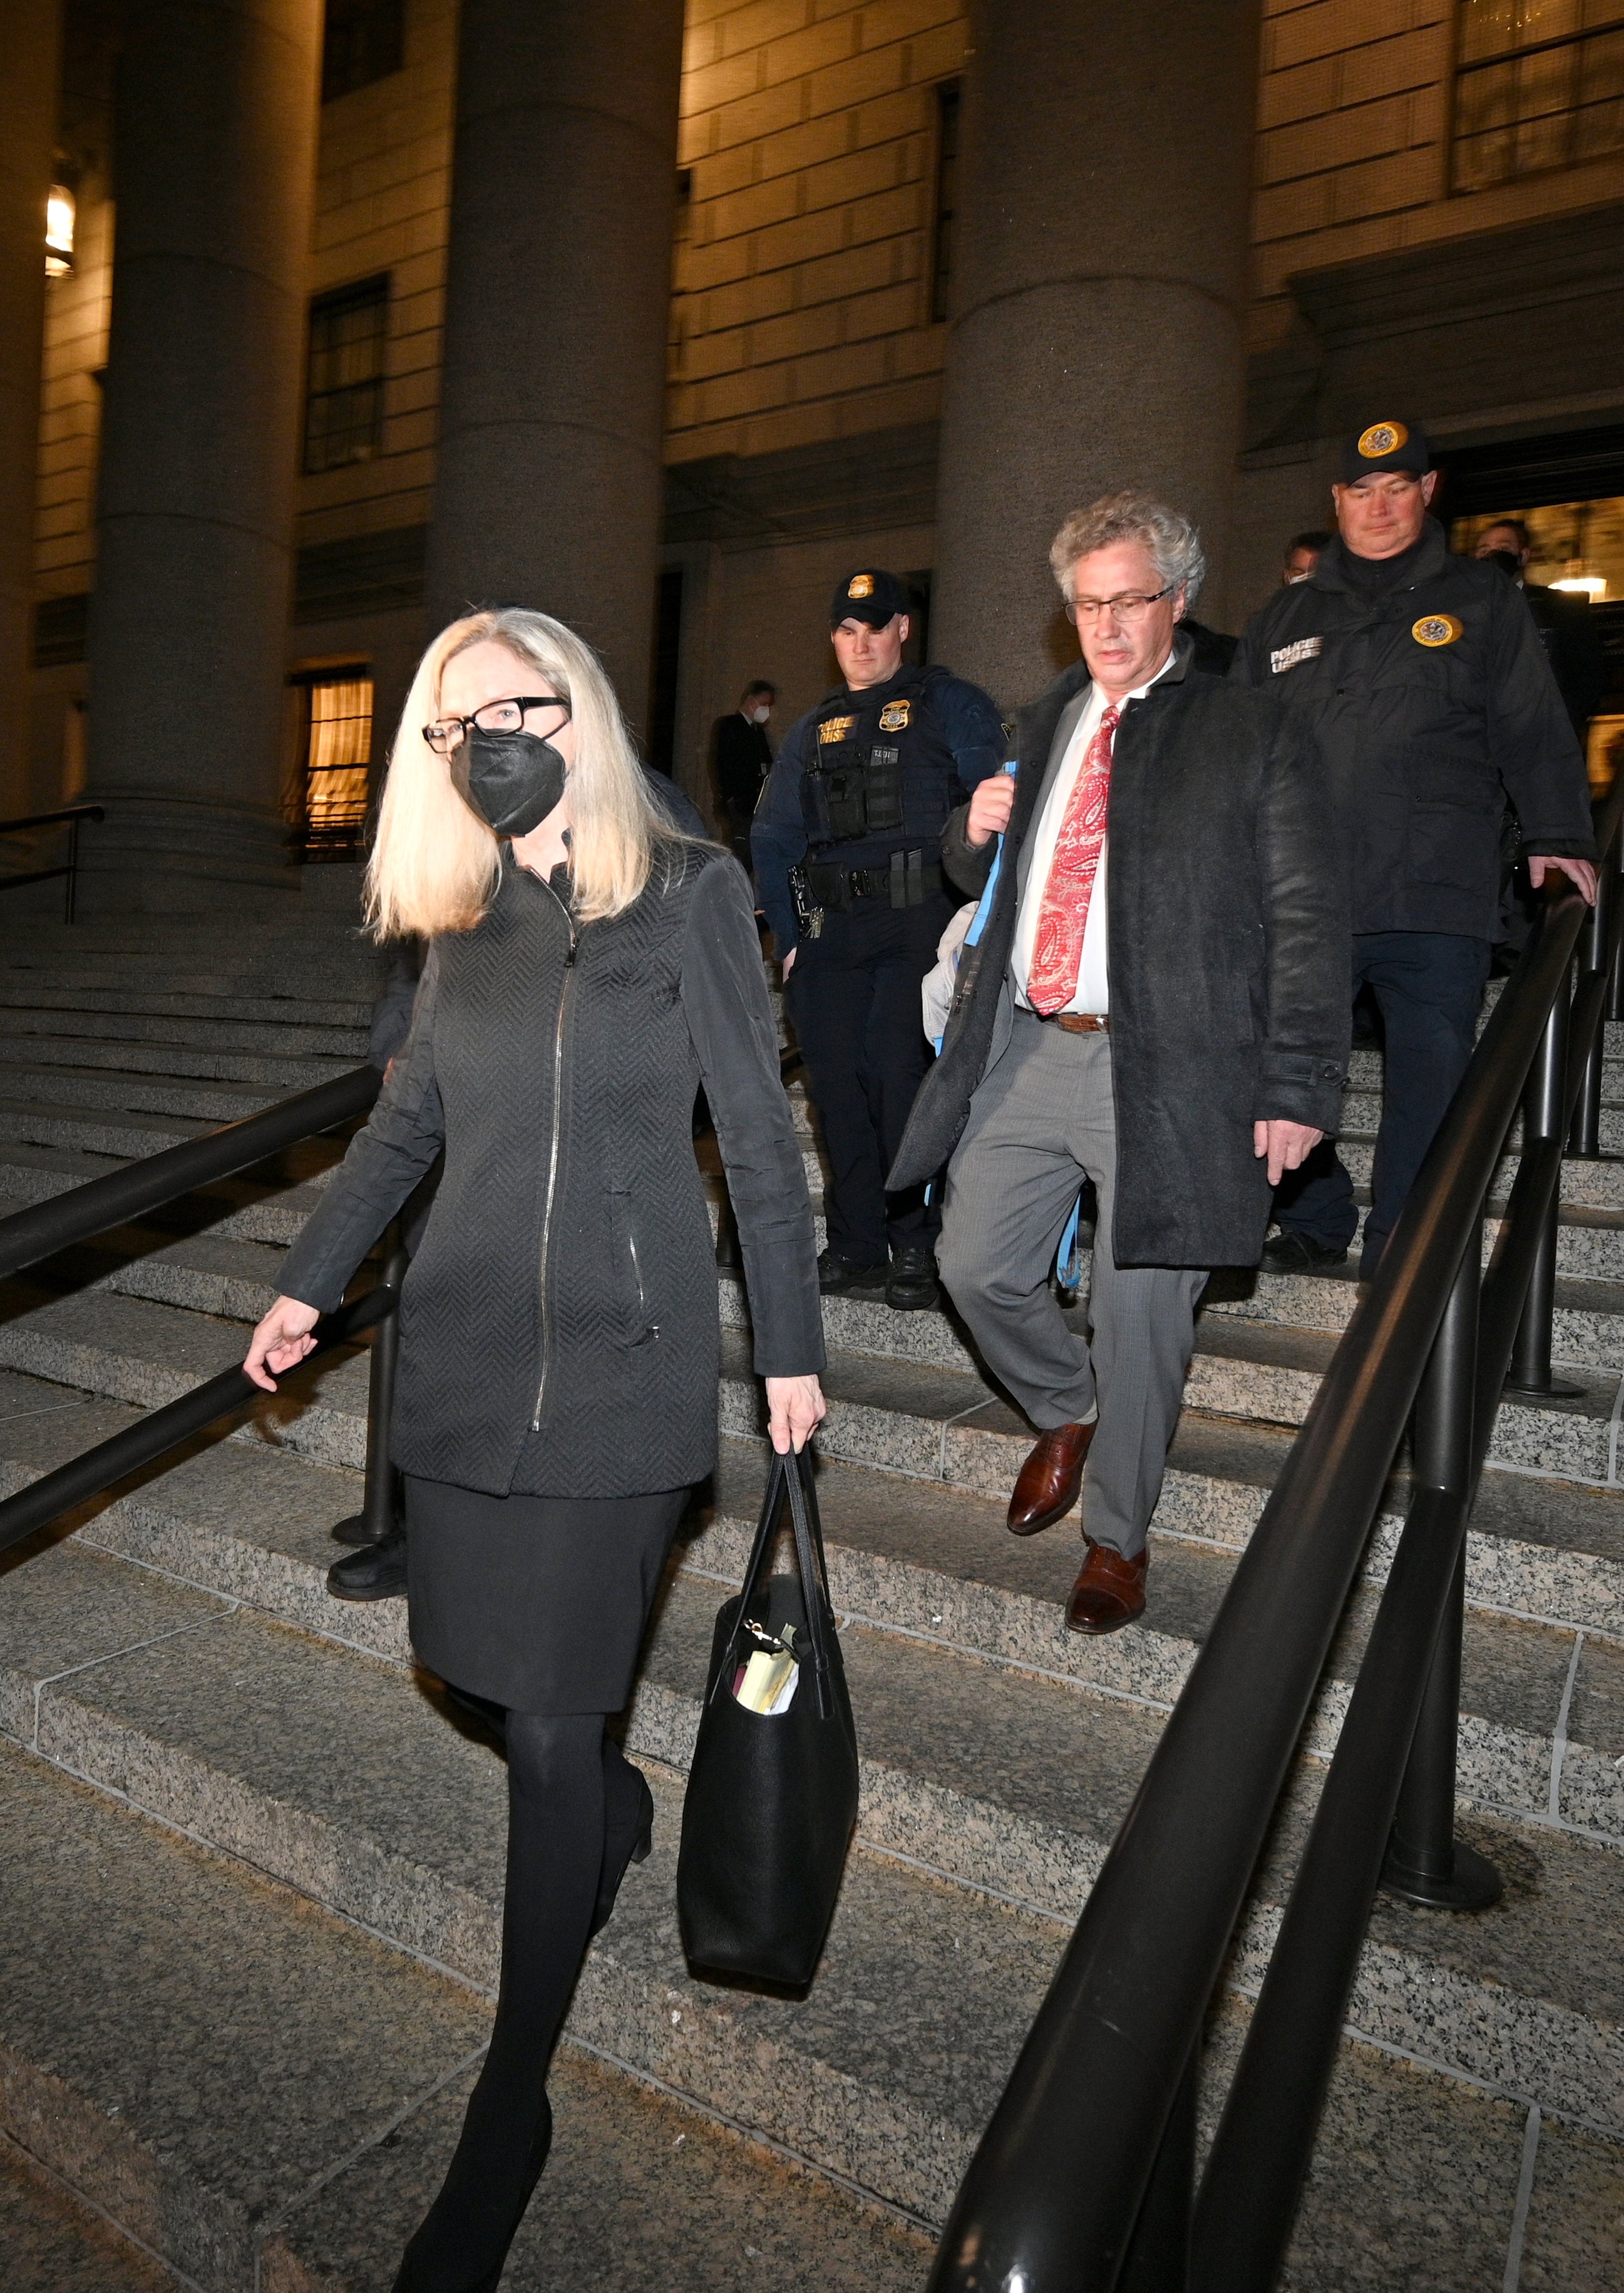 Defence attorneys Laura Menninger (left) and Jeffrey Pagliuca (middle right) leaving the federal courthouse in the Southern District of New York (Anthony Behar/PA)